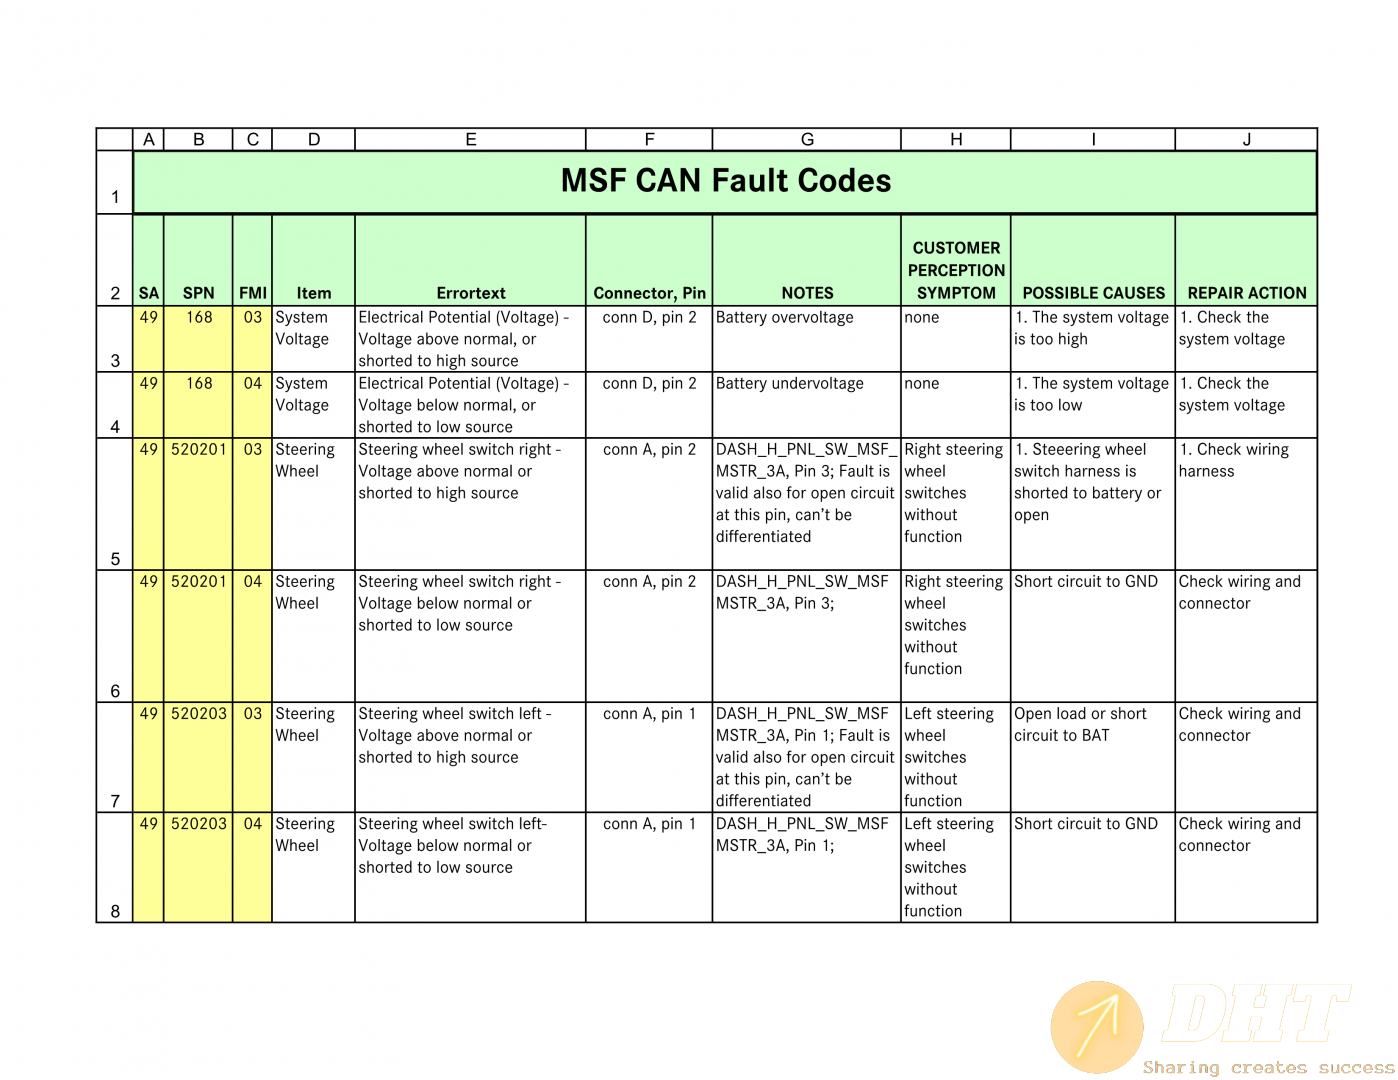 MSF Fault Codes 6.0.png